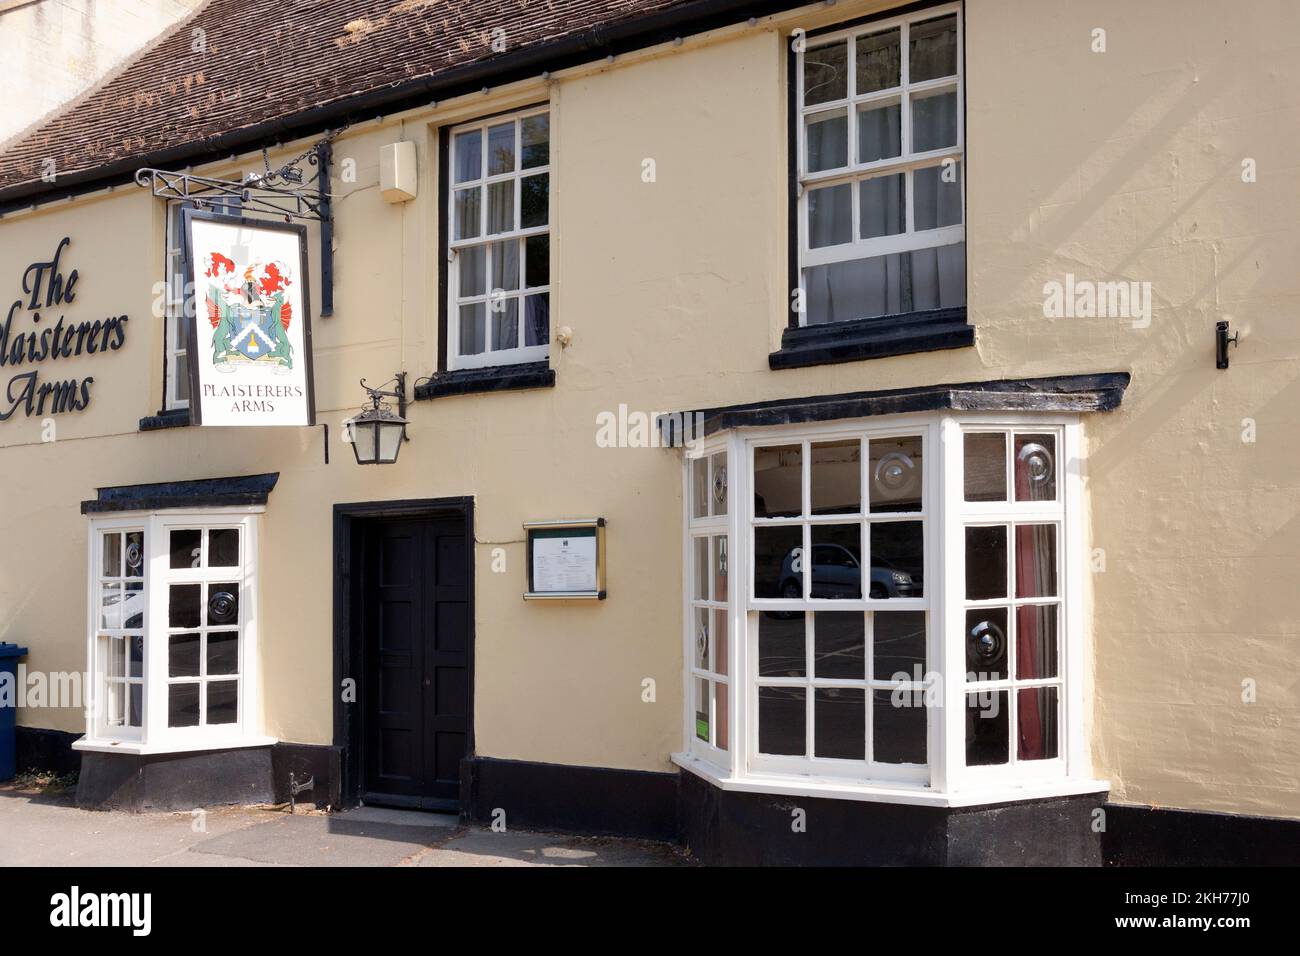 Die Plaisterers Arms, Winchcombe, Glouchestershire Stockfoto